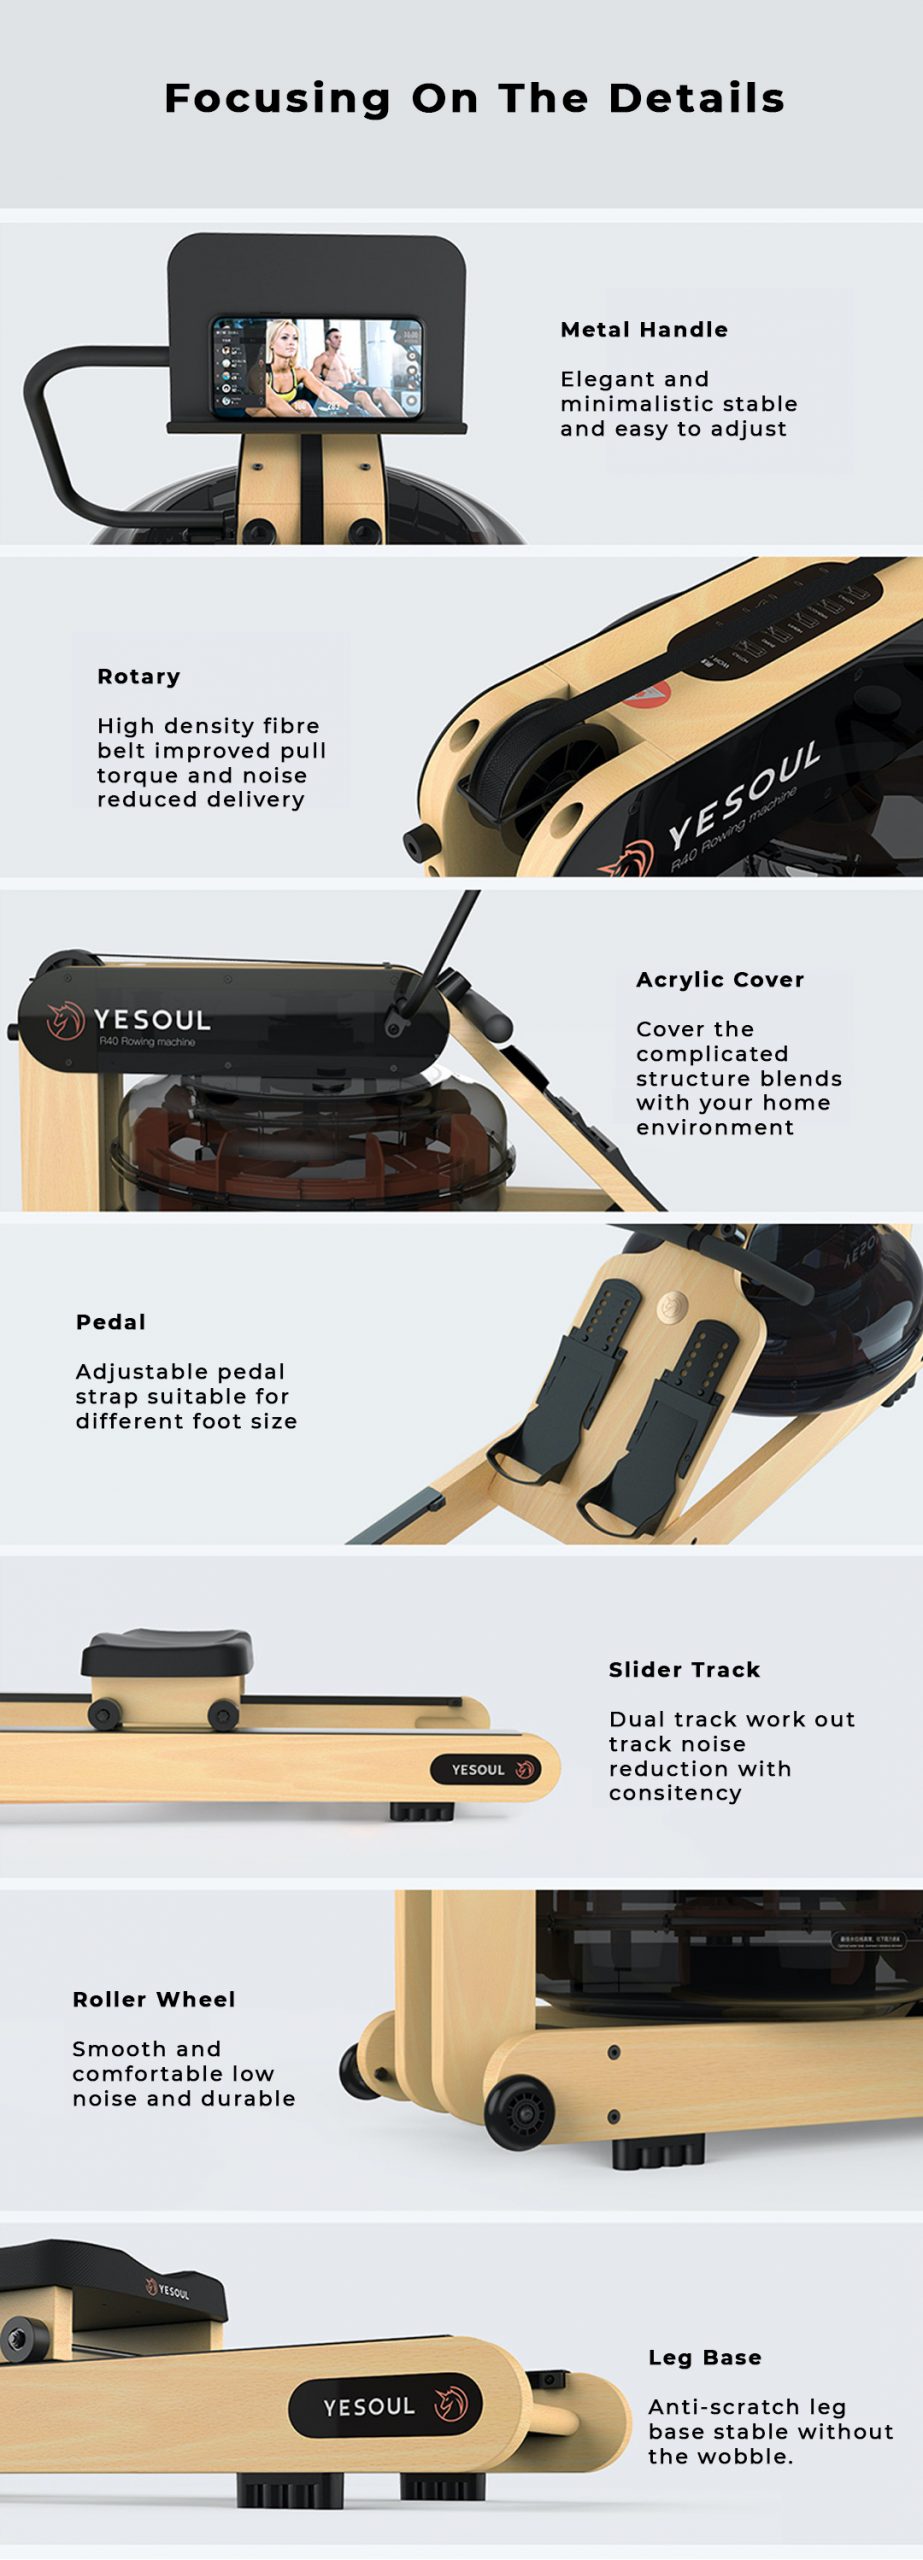 Yesoul Foldable Smart Water Rowing Machine R40s